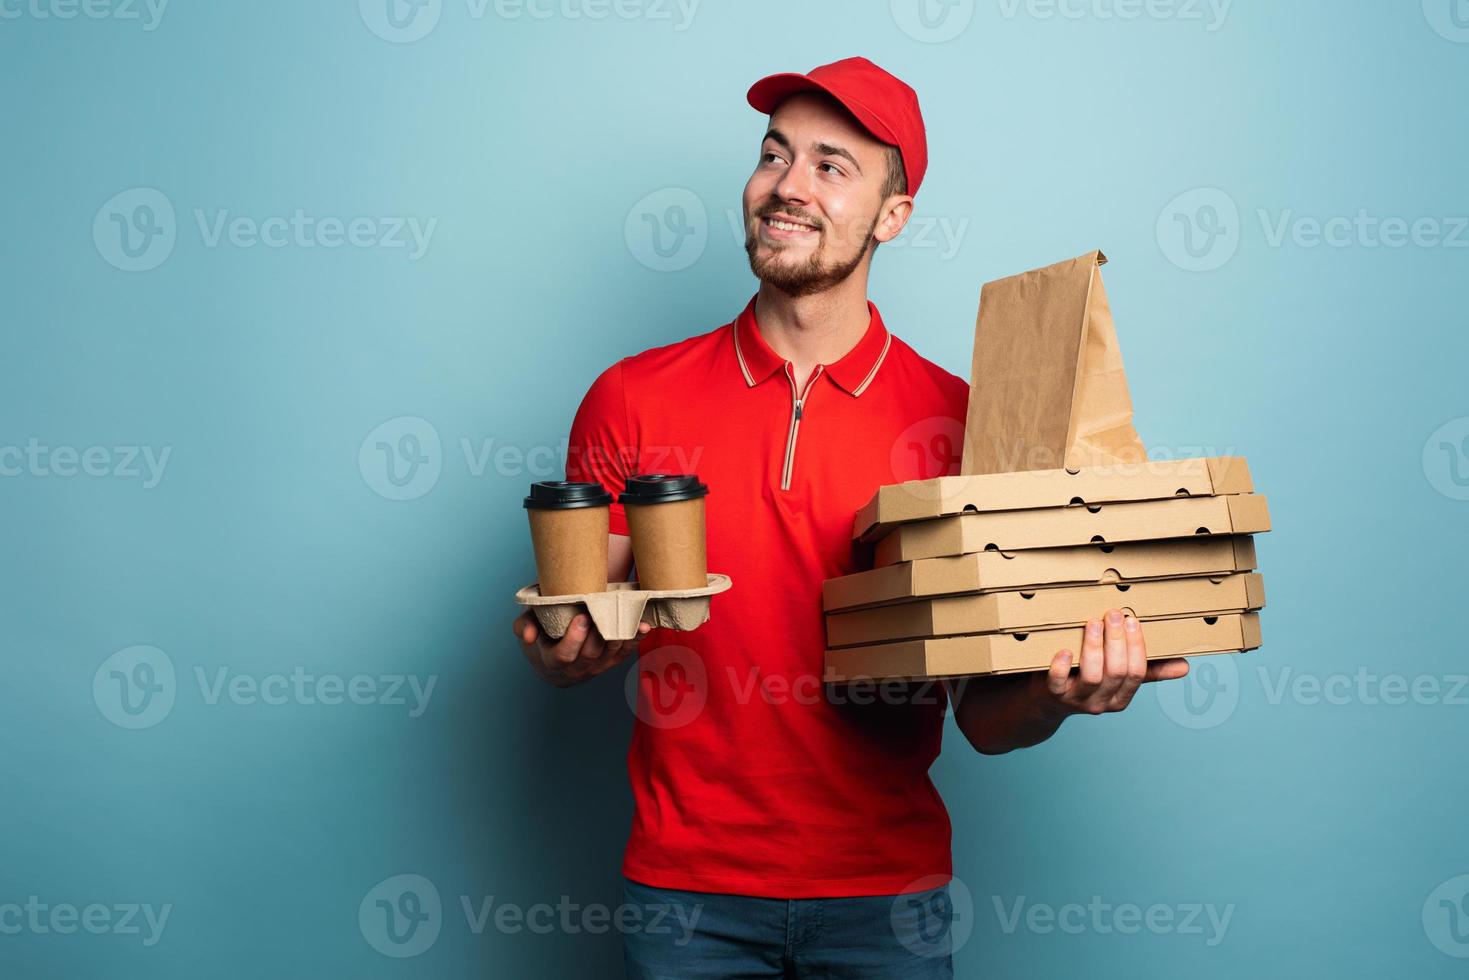 Courier is happy to deliver hot coffee,pizza and food. Cyan background photo